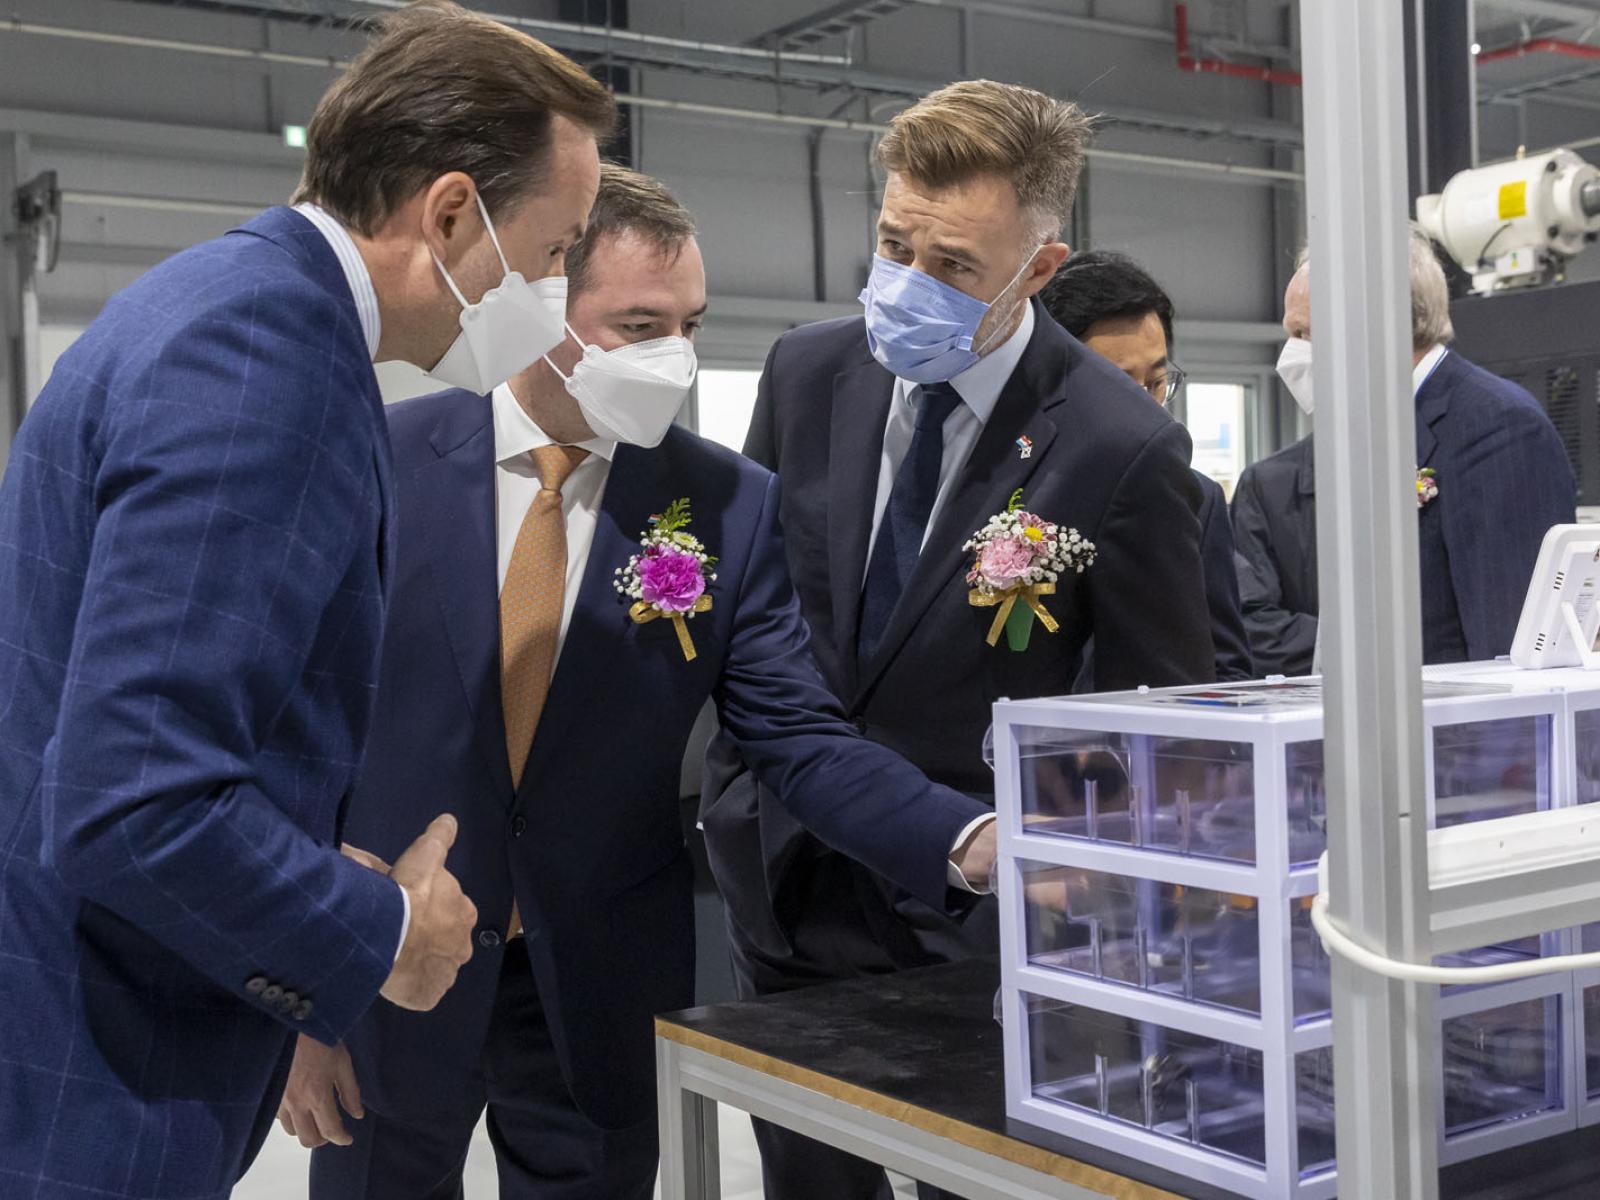 The Prince and the Minister during their visit of the new plant